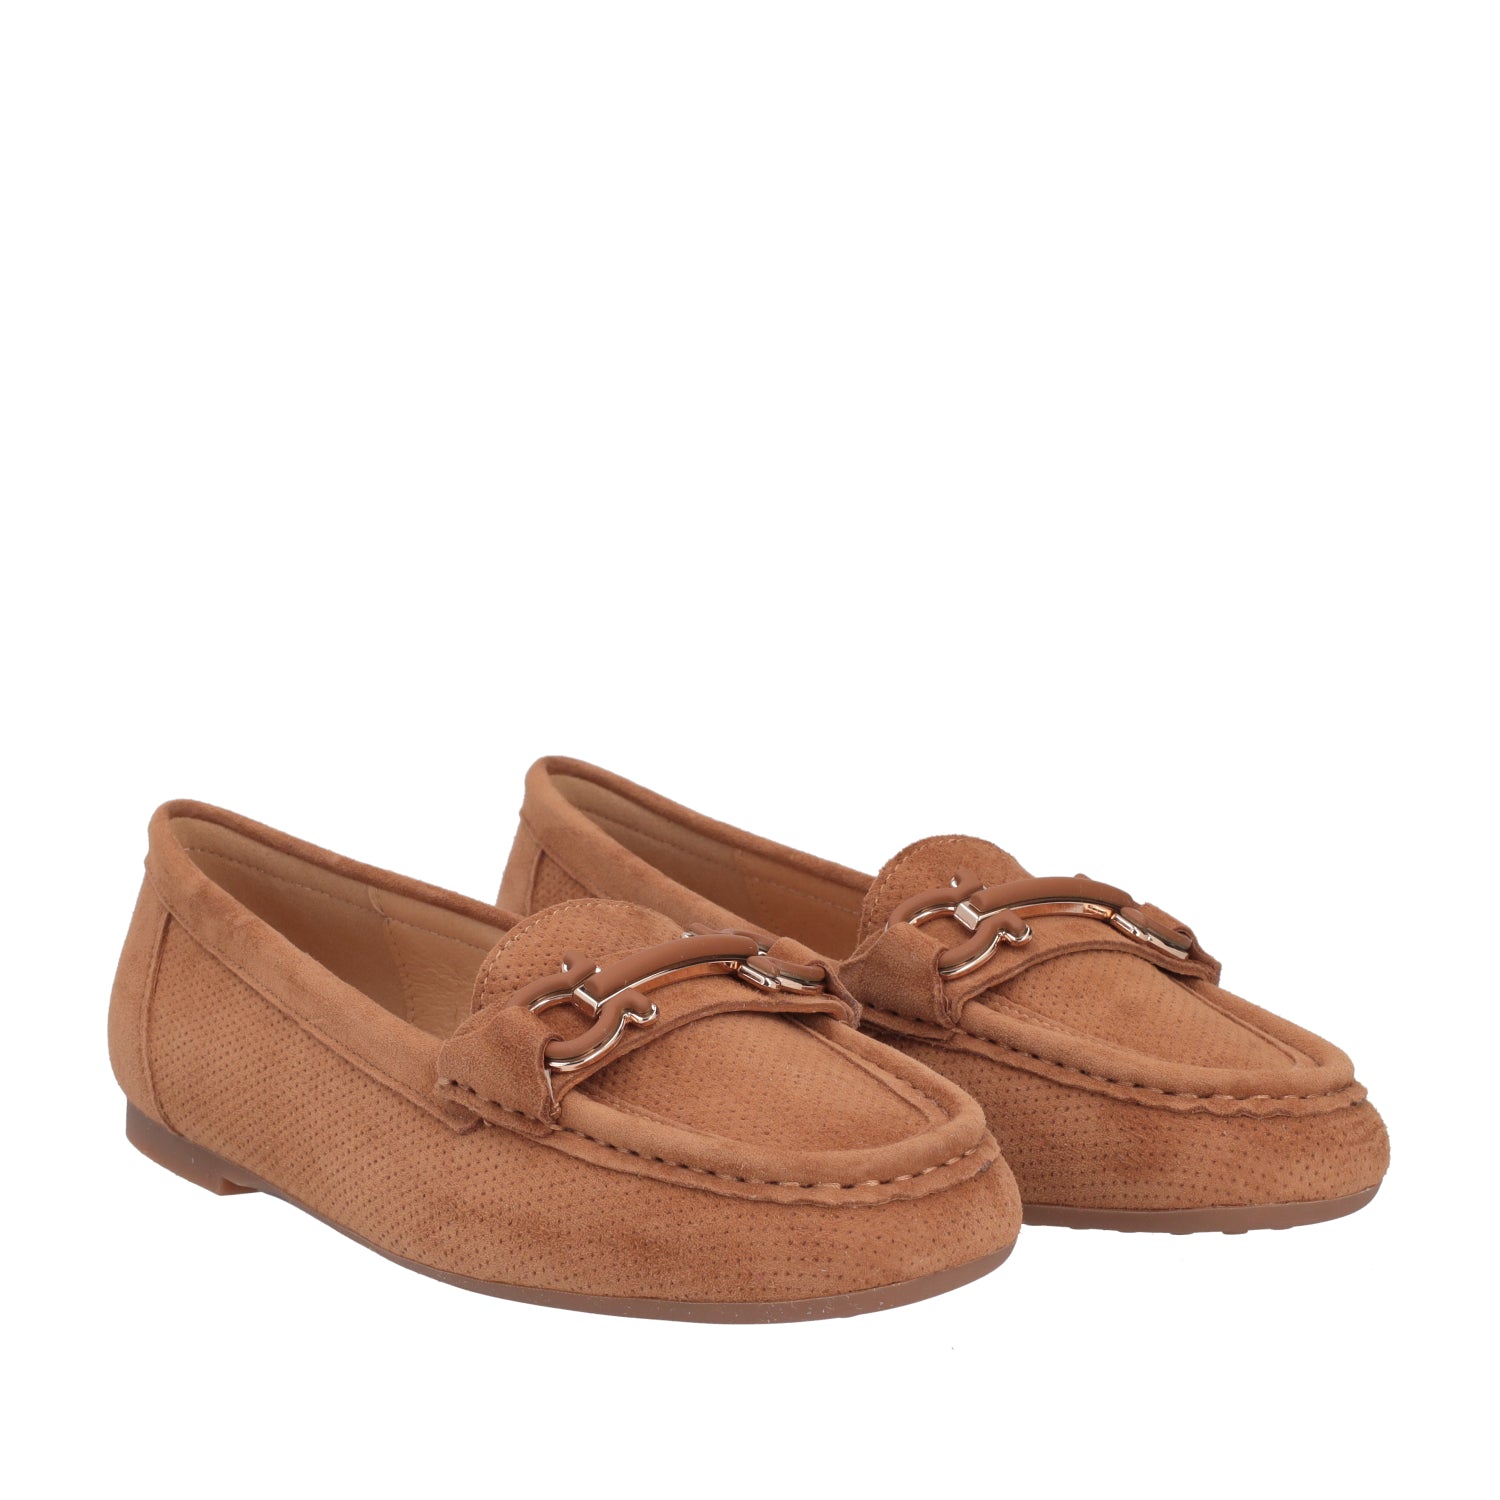 TAN CARMEN MOCCASIN IN PERFORATED LEATHER